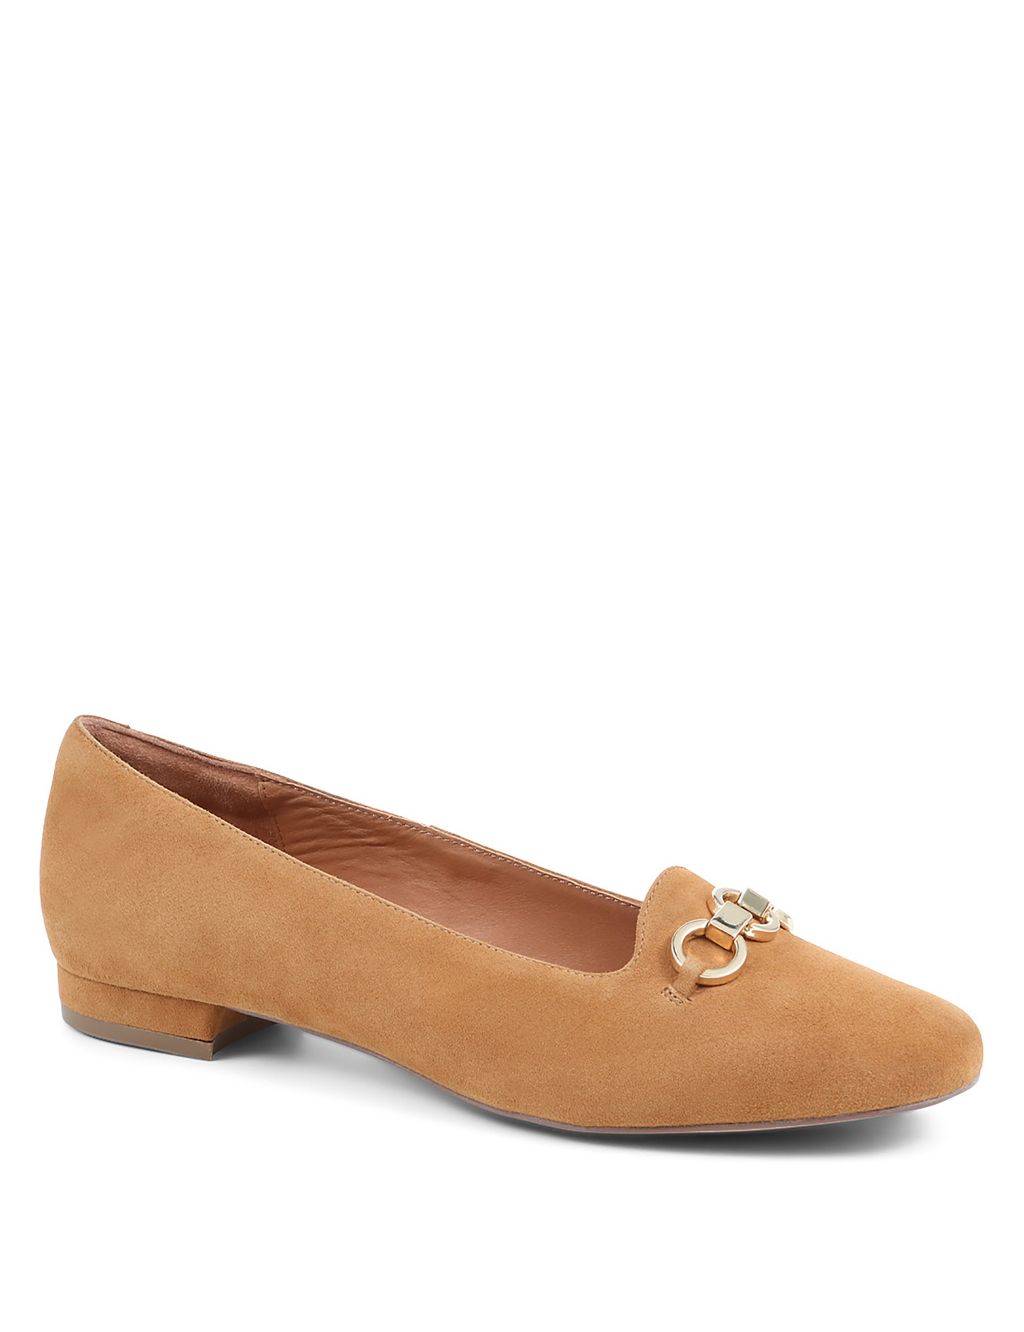 Suede Buckle Flat Loafers image 2